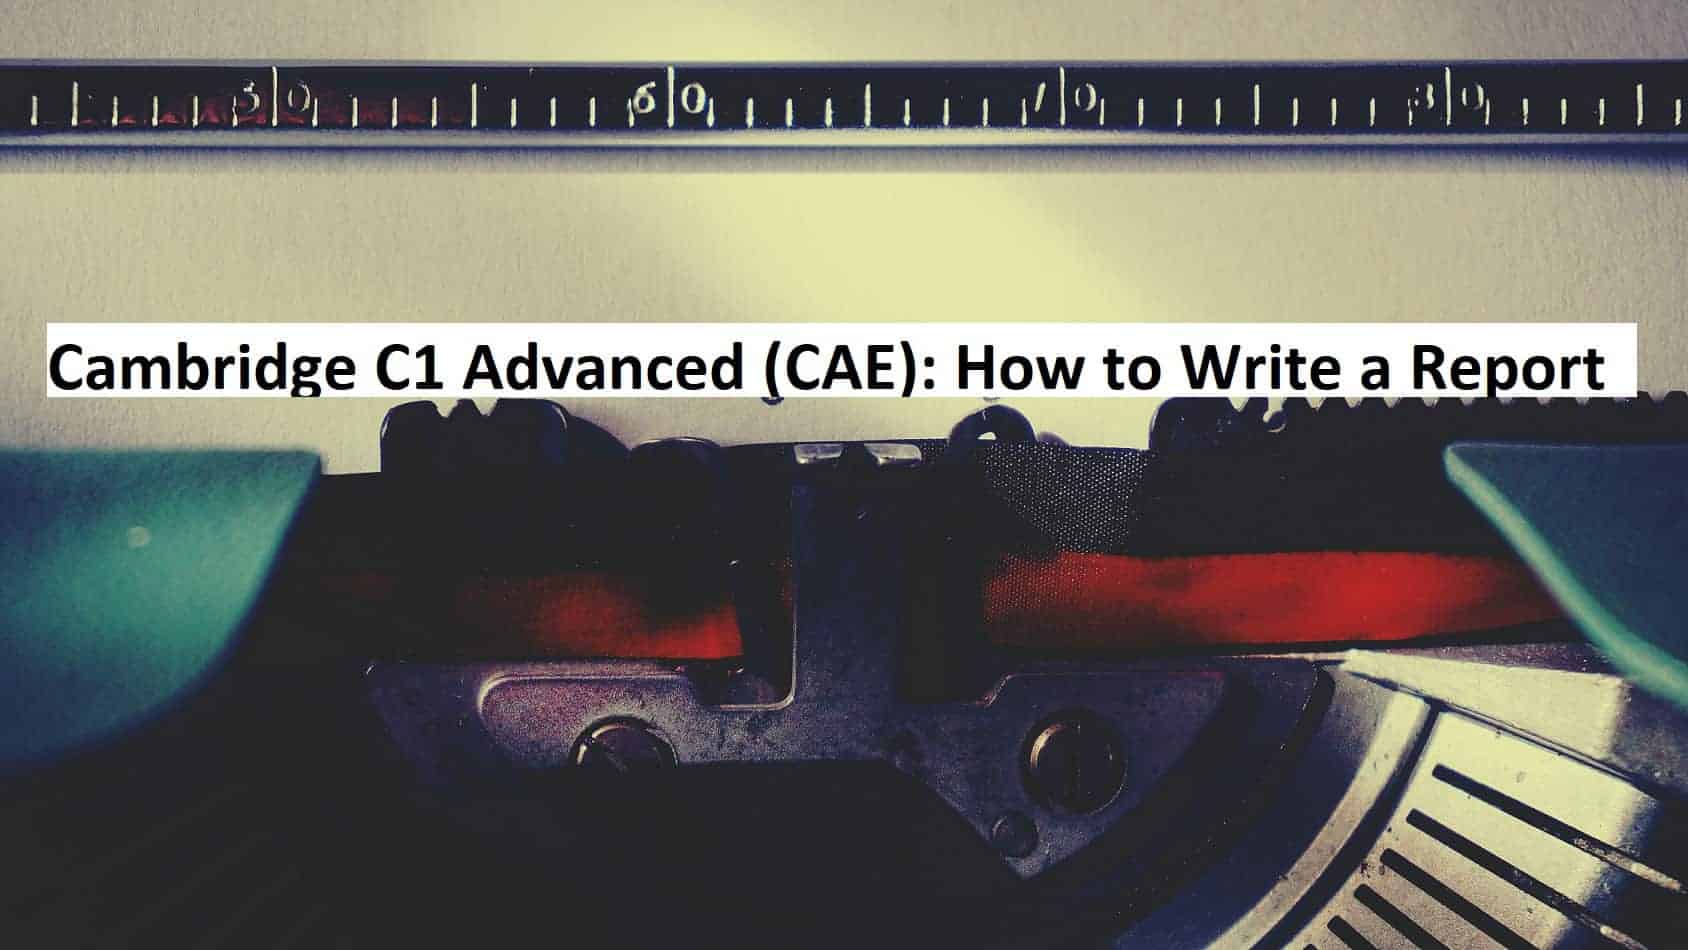 CAE - How to Write a Report